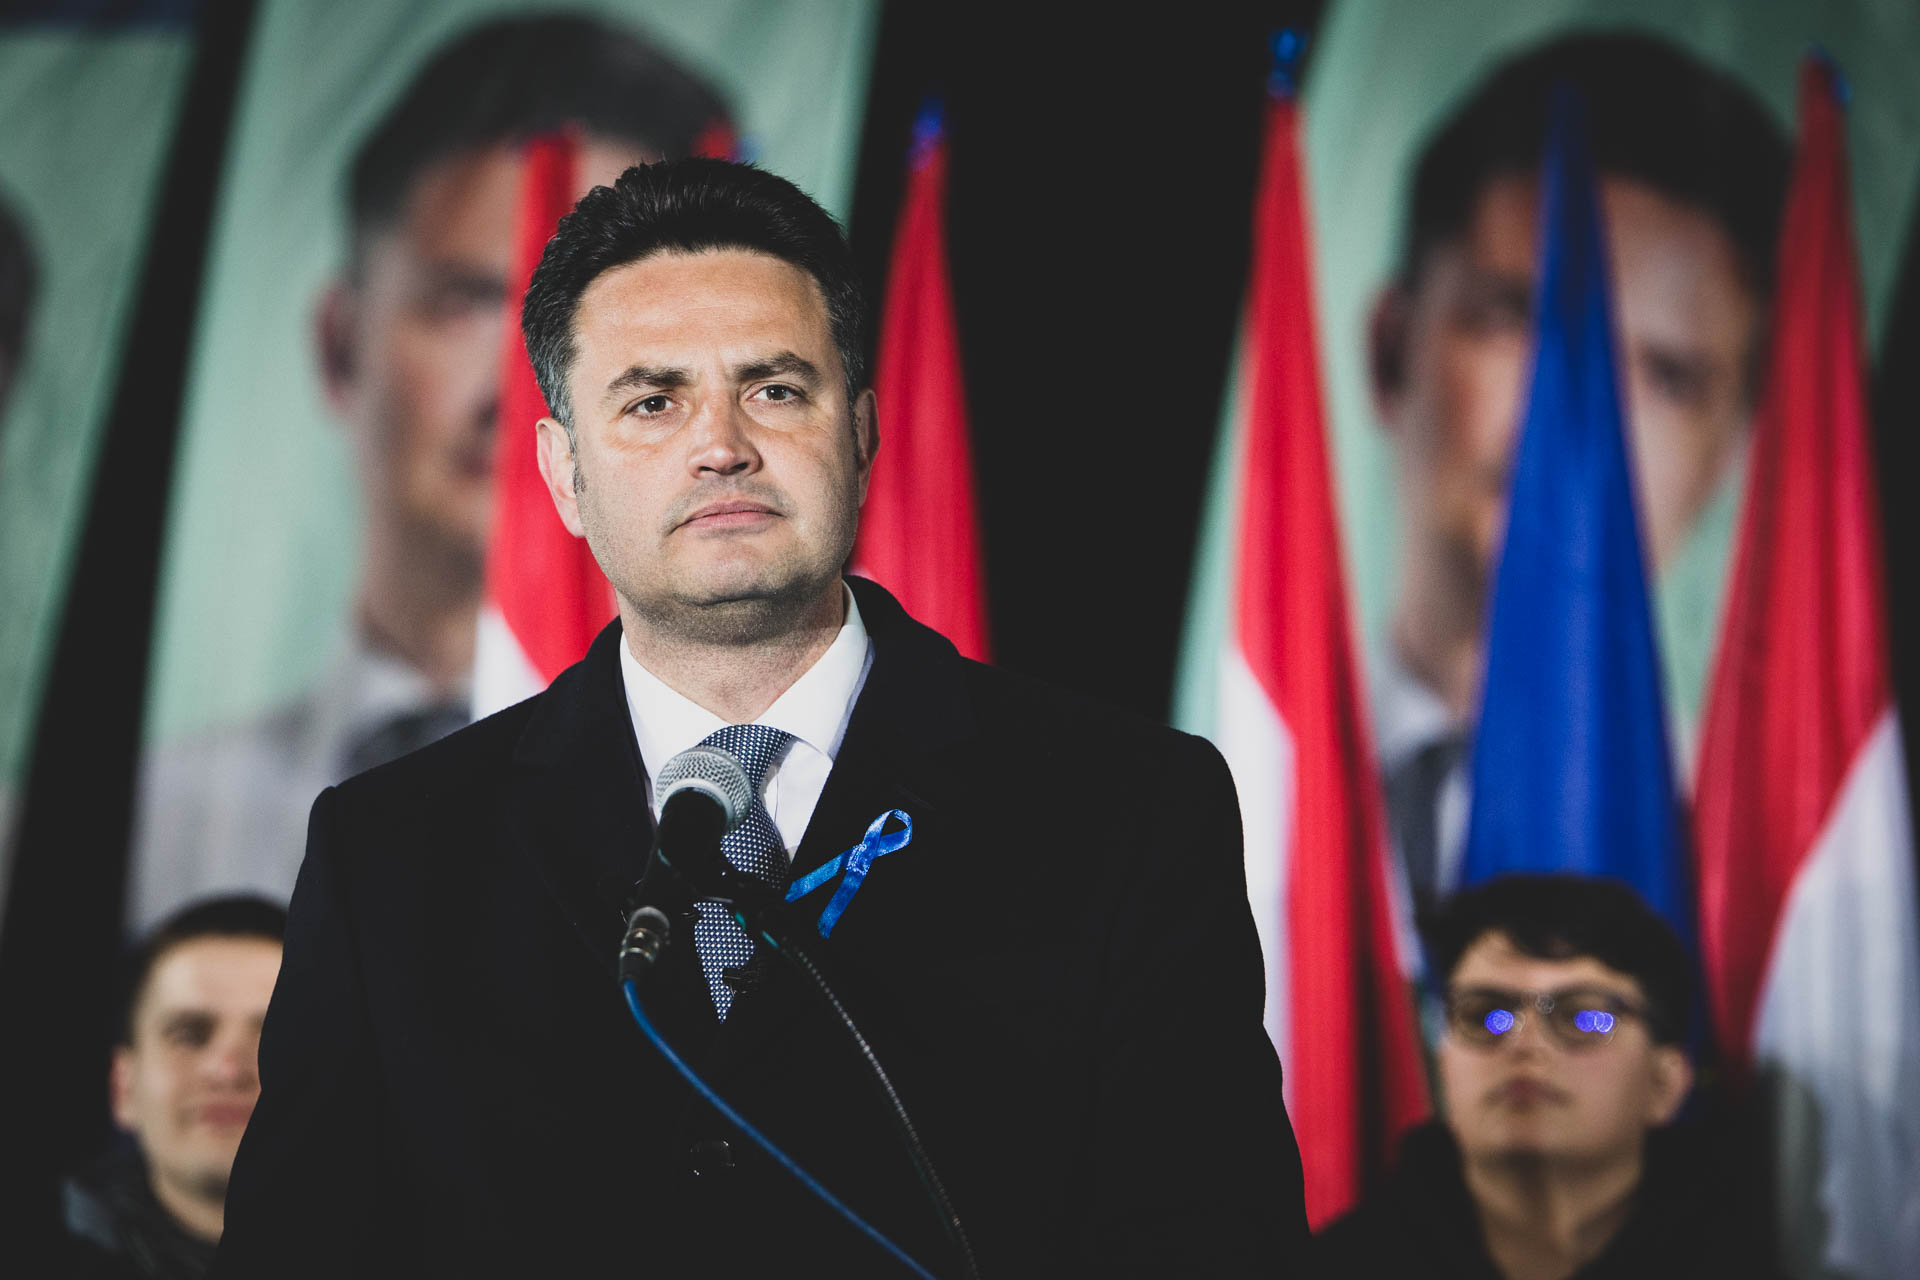 Hungarian Opinion: Analysts on Why the Opposition Lost the Election